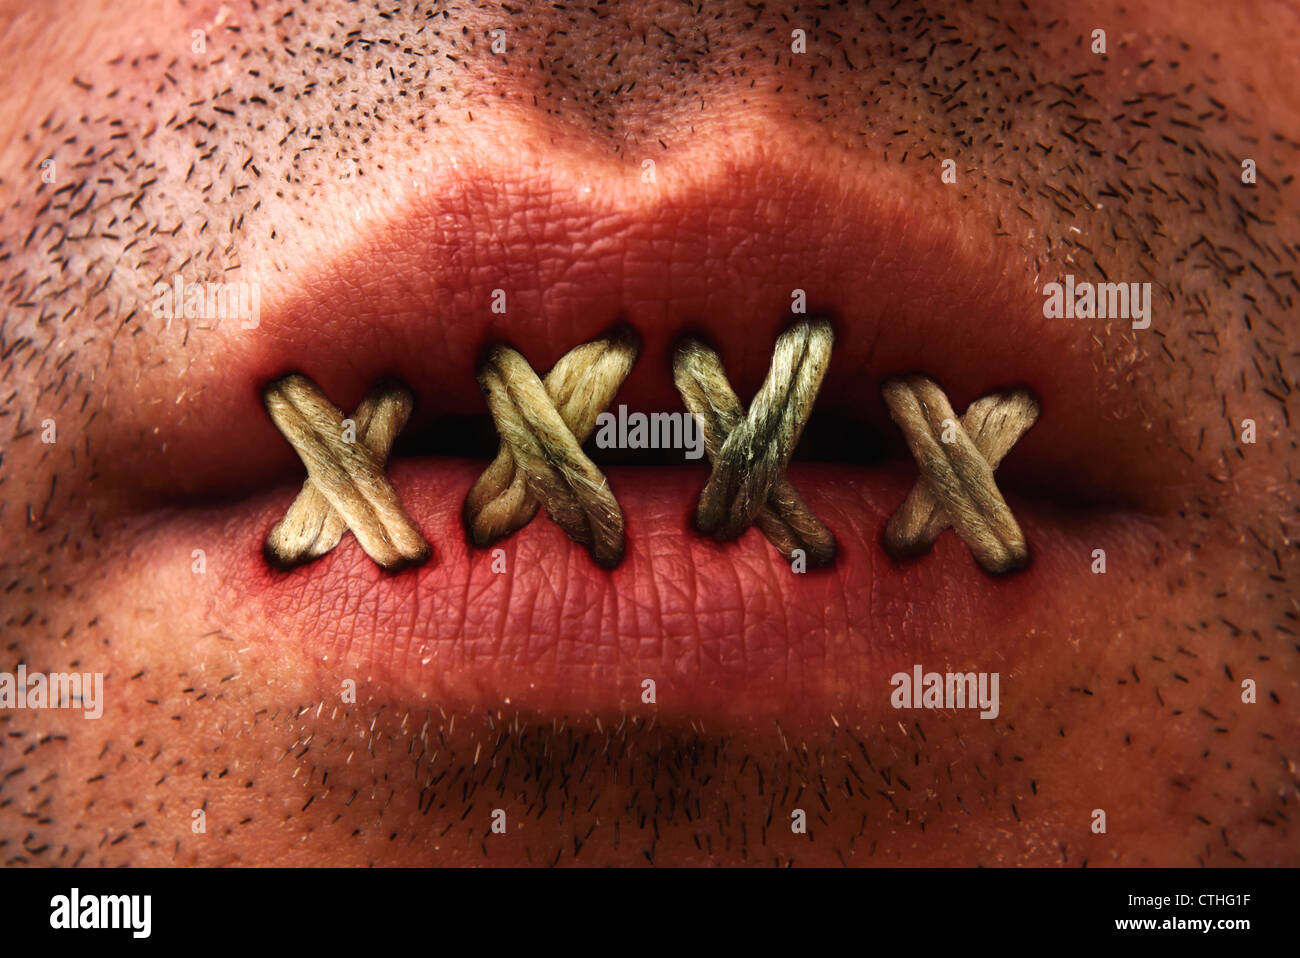 Close up of man's mouth with lips stitched or sewn shut. Stock Photo